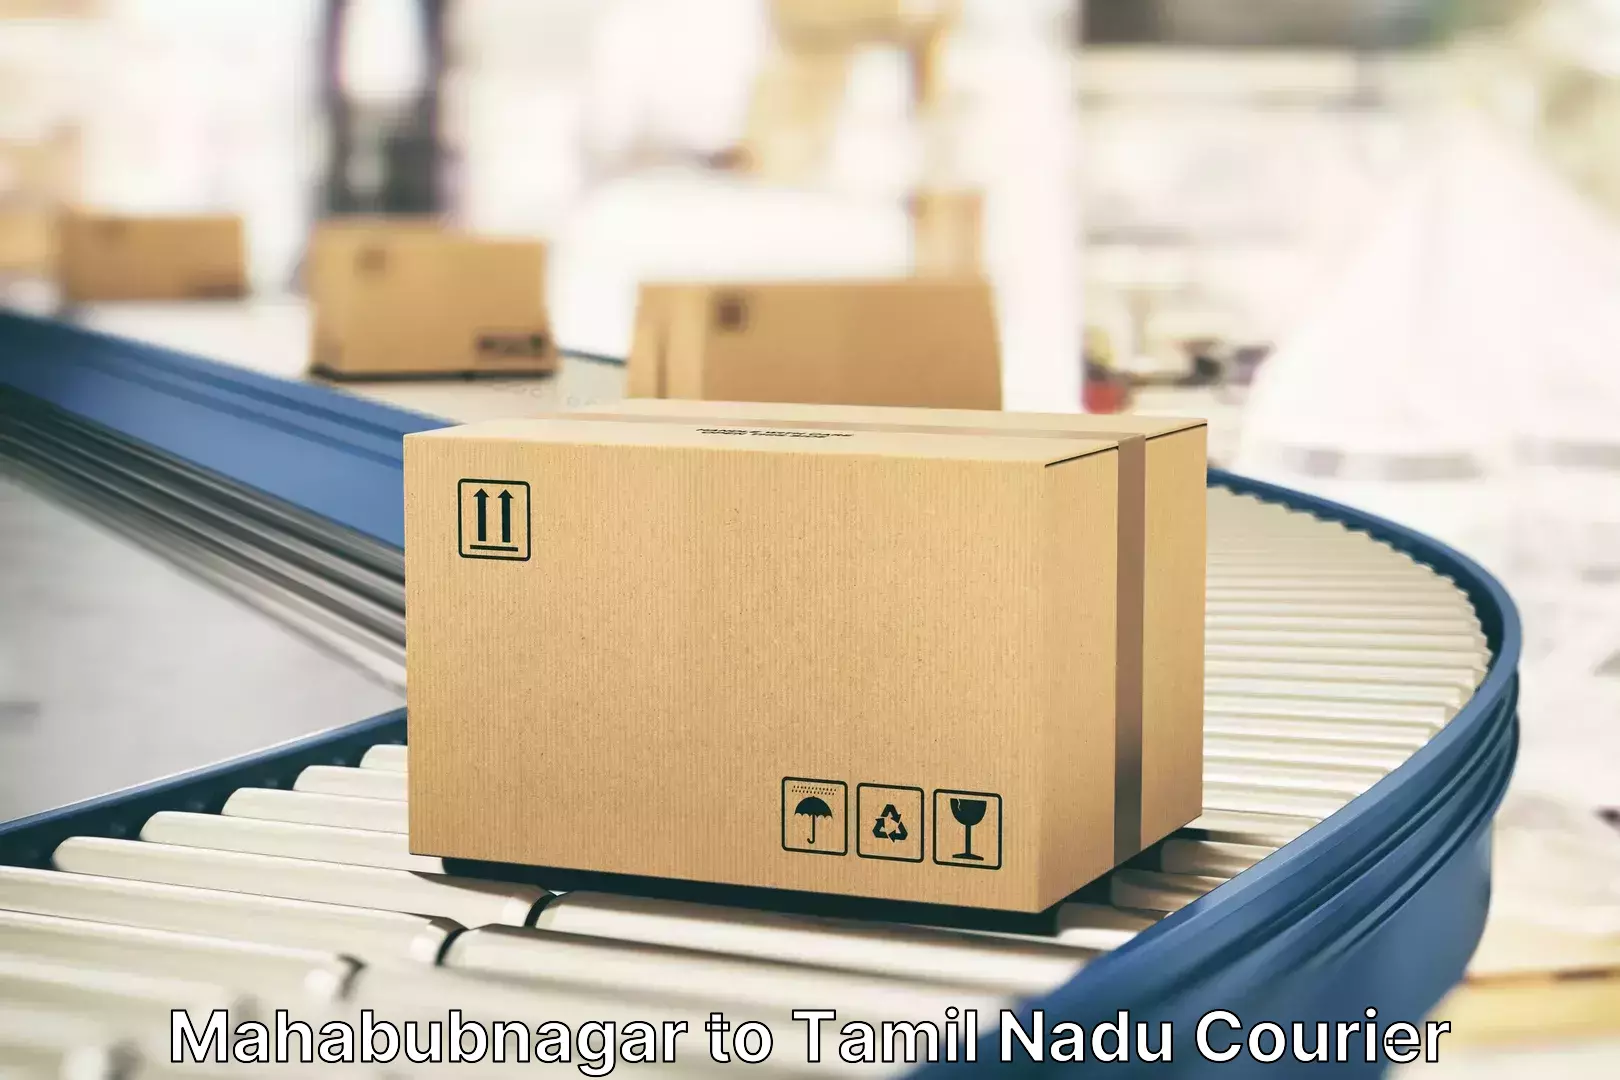 Luggage delivery providers Mahabubnagar to Ennore Port Chennai